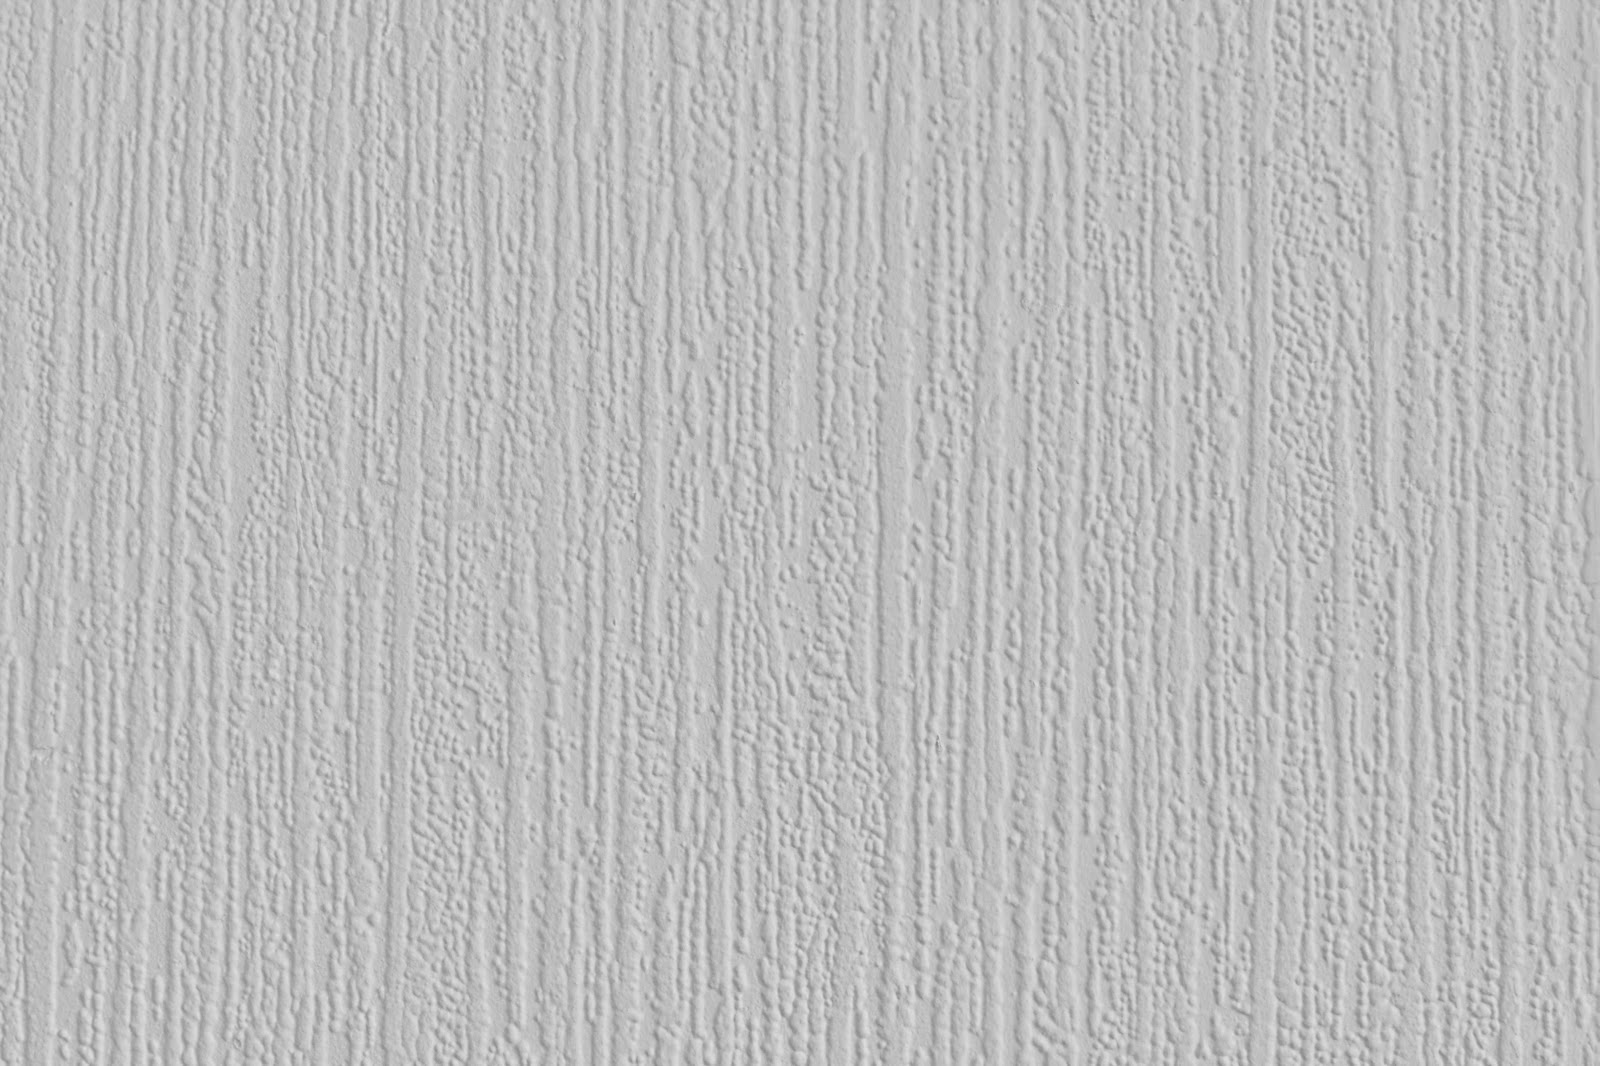 High Resolution Textures Stucco 3 White Plaster Wall Paper Texture